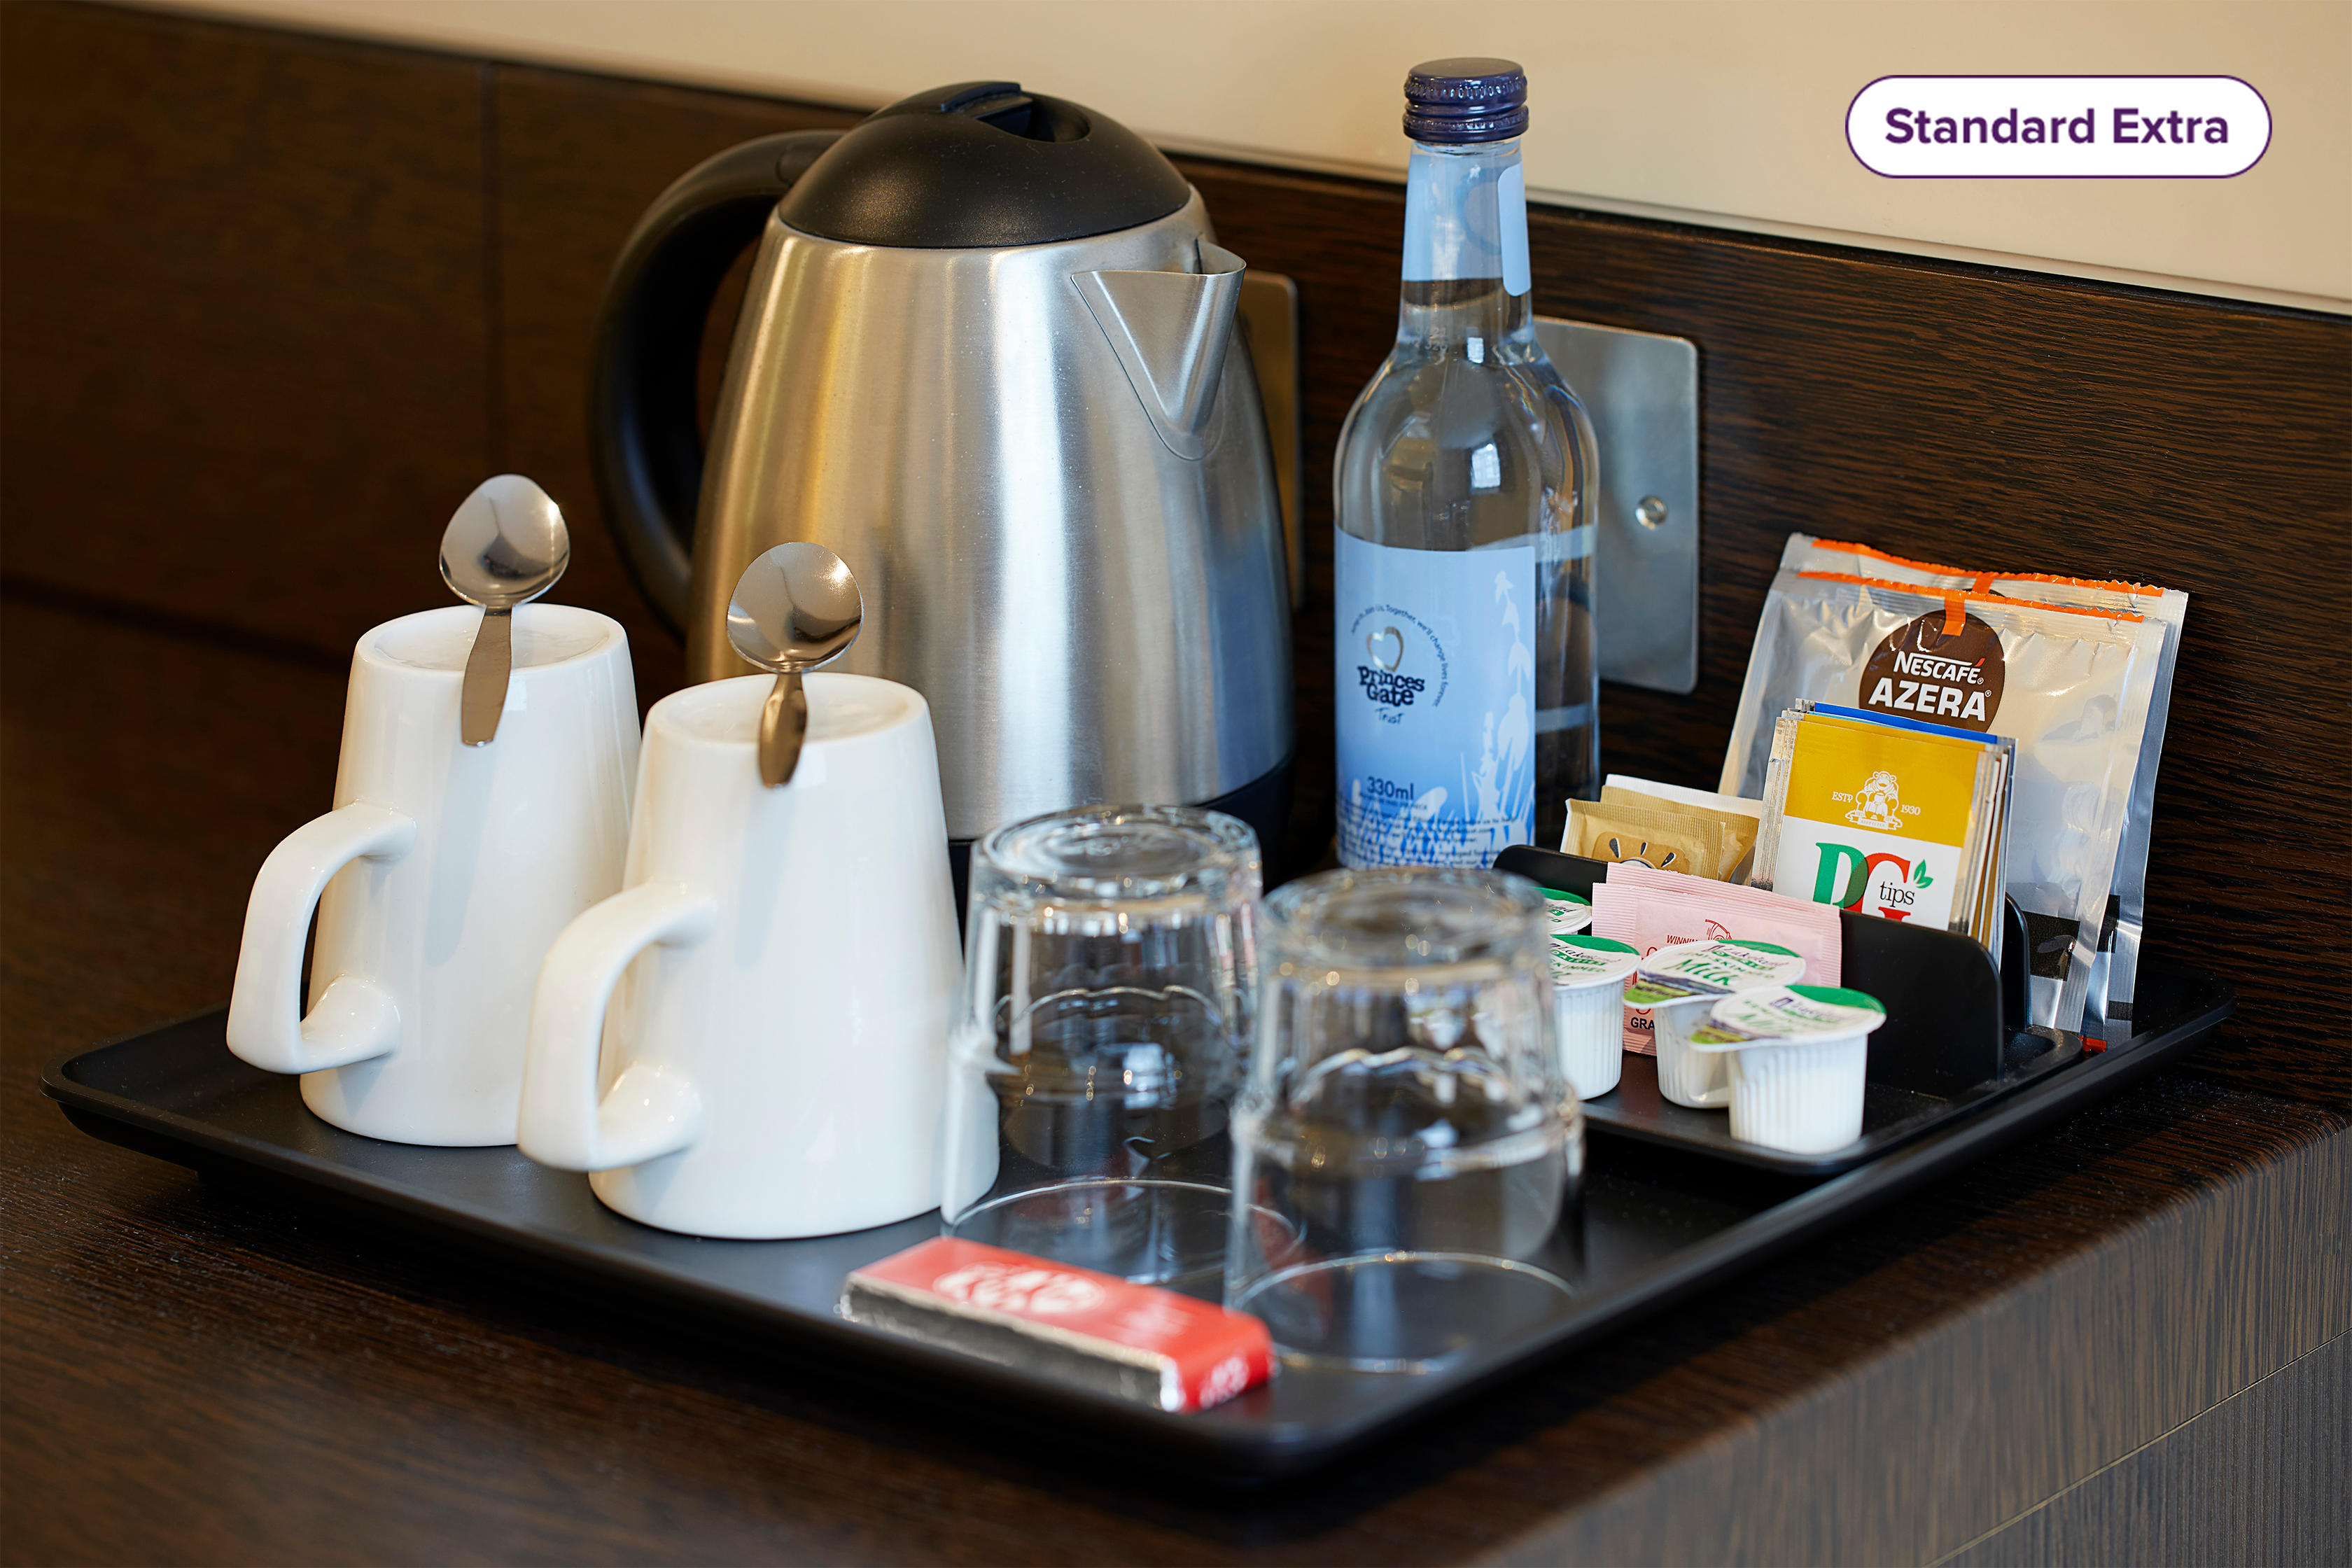 Standard Extra Bedroom with tea and coffee making facilities Premier Inn Southampton City Centre hotel Southampton 03333 219006